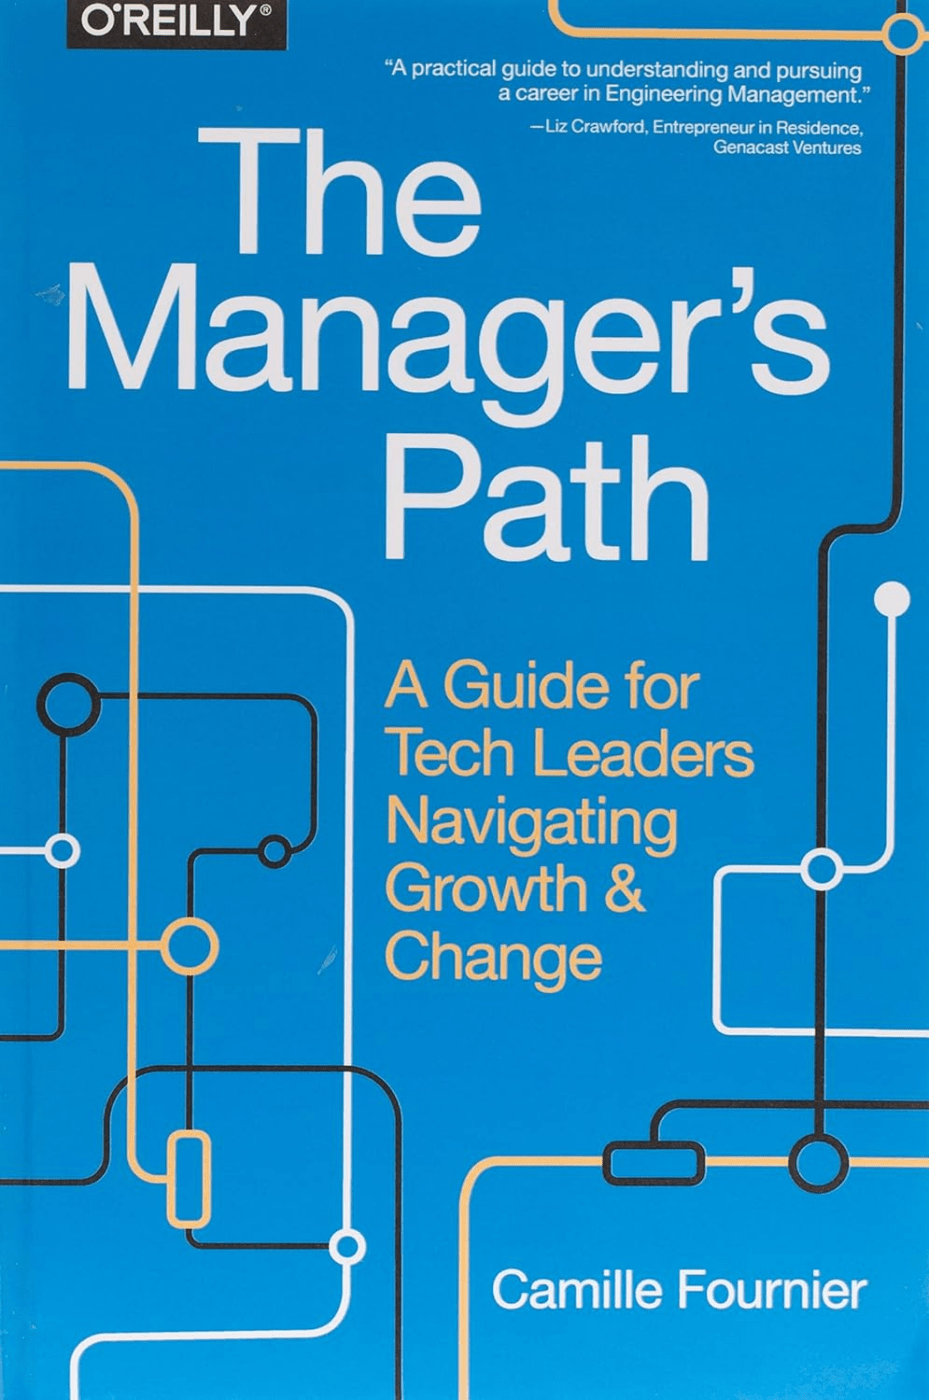 The Manager's Path Book Summary at a Glance